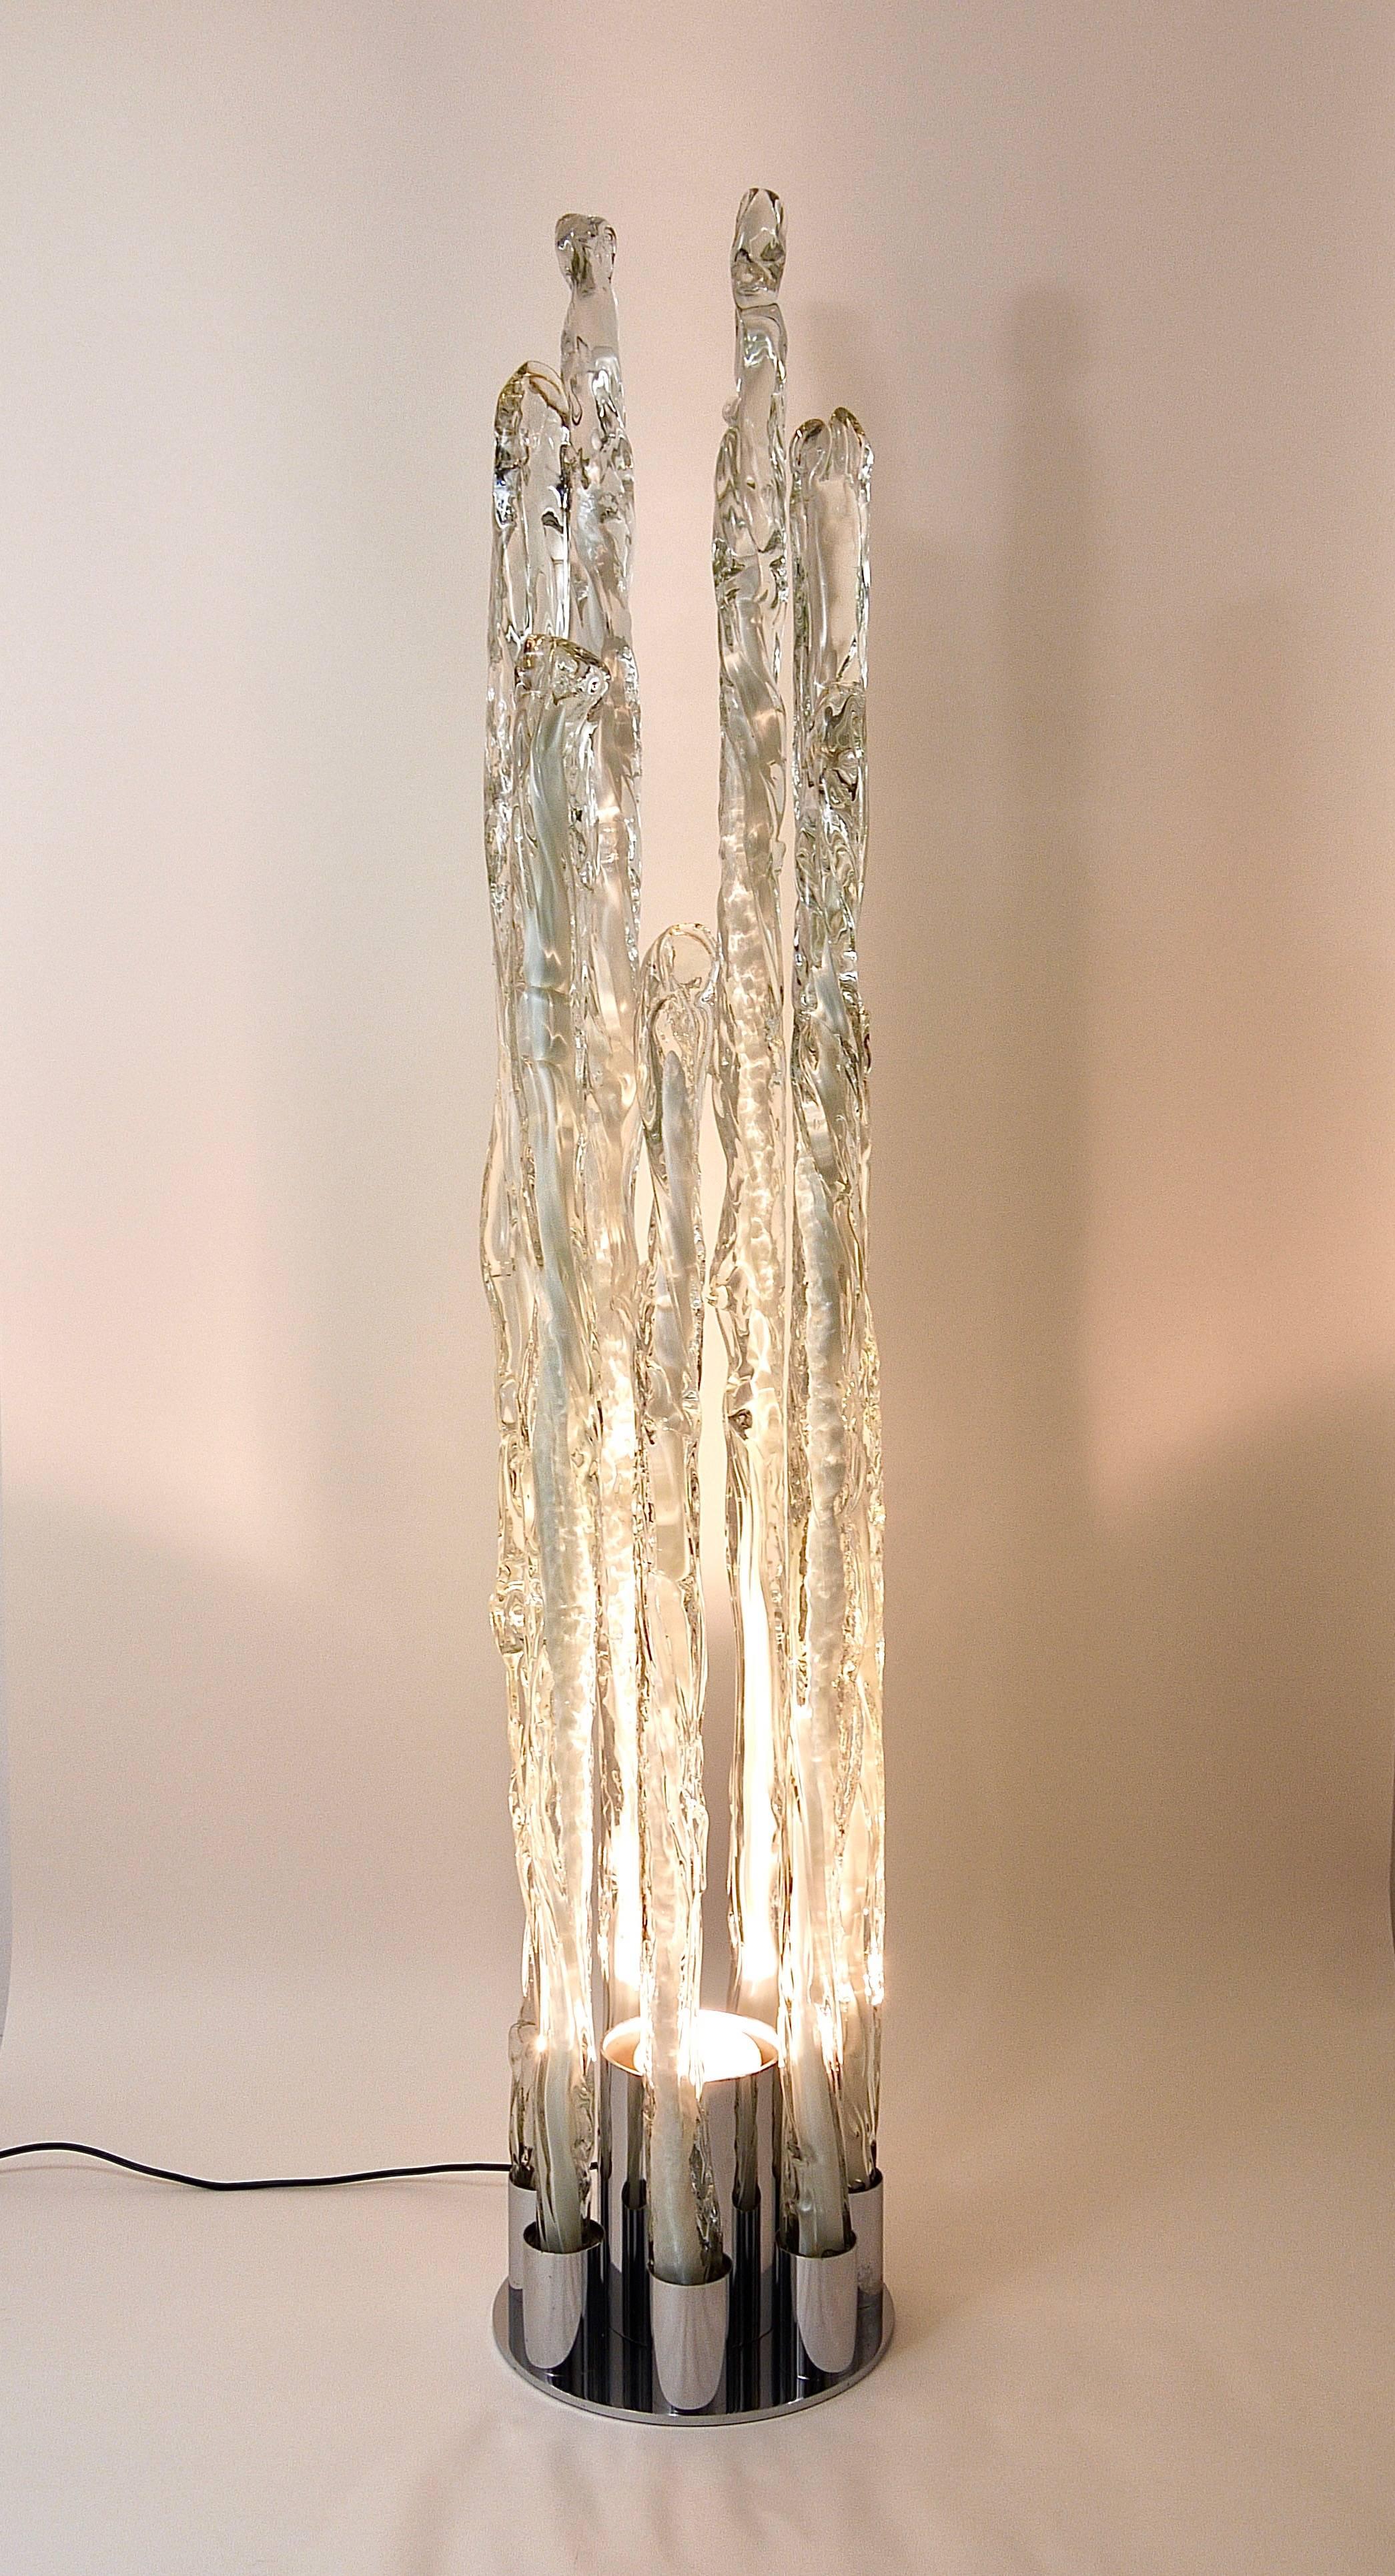 An impressive and huge floor lamp from the 1960s, designed by Ettore Fantasia and Gino Poli for Sothis Murano. Made of Murano glass. Consists of a round chrome-plated metal base and seven handblown, clear and white melting glass icicle sticks. In